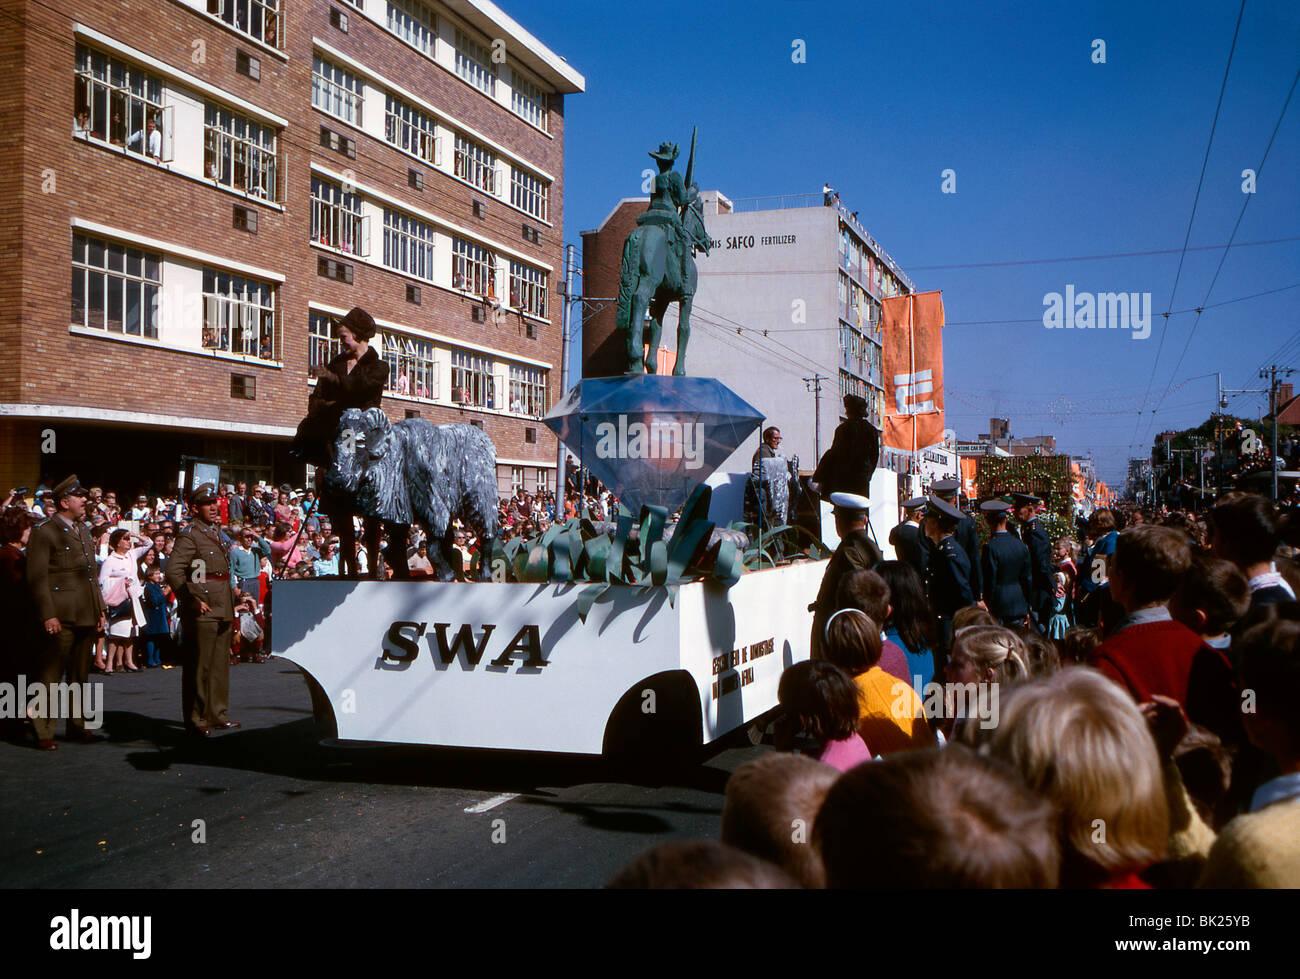 Parade float promoting produce of SWA (South-Western Africa or Namibia), during the apartheid era, Durban, South Africa, 1966 Stock Photo